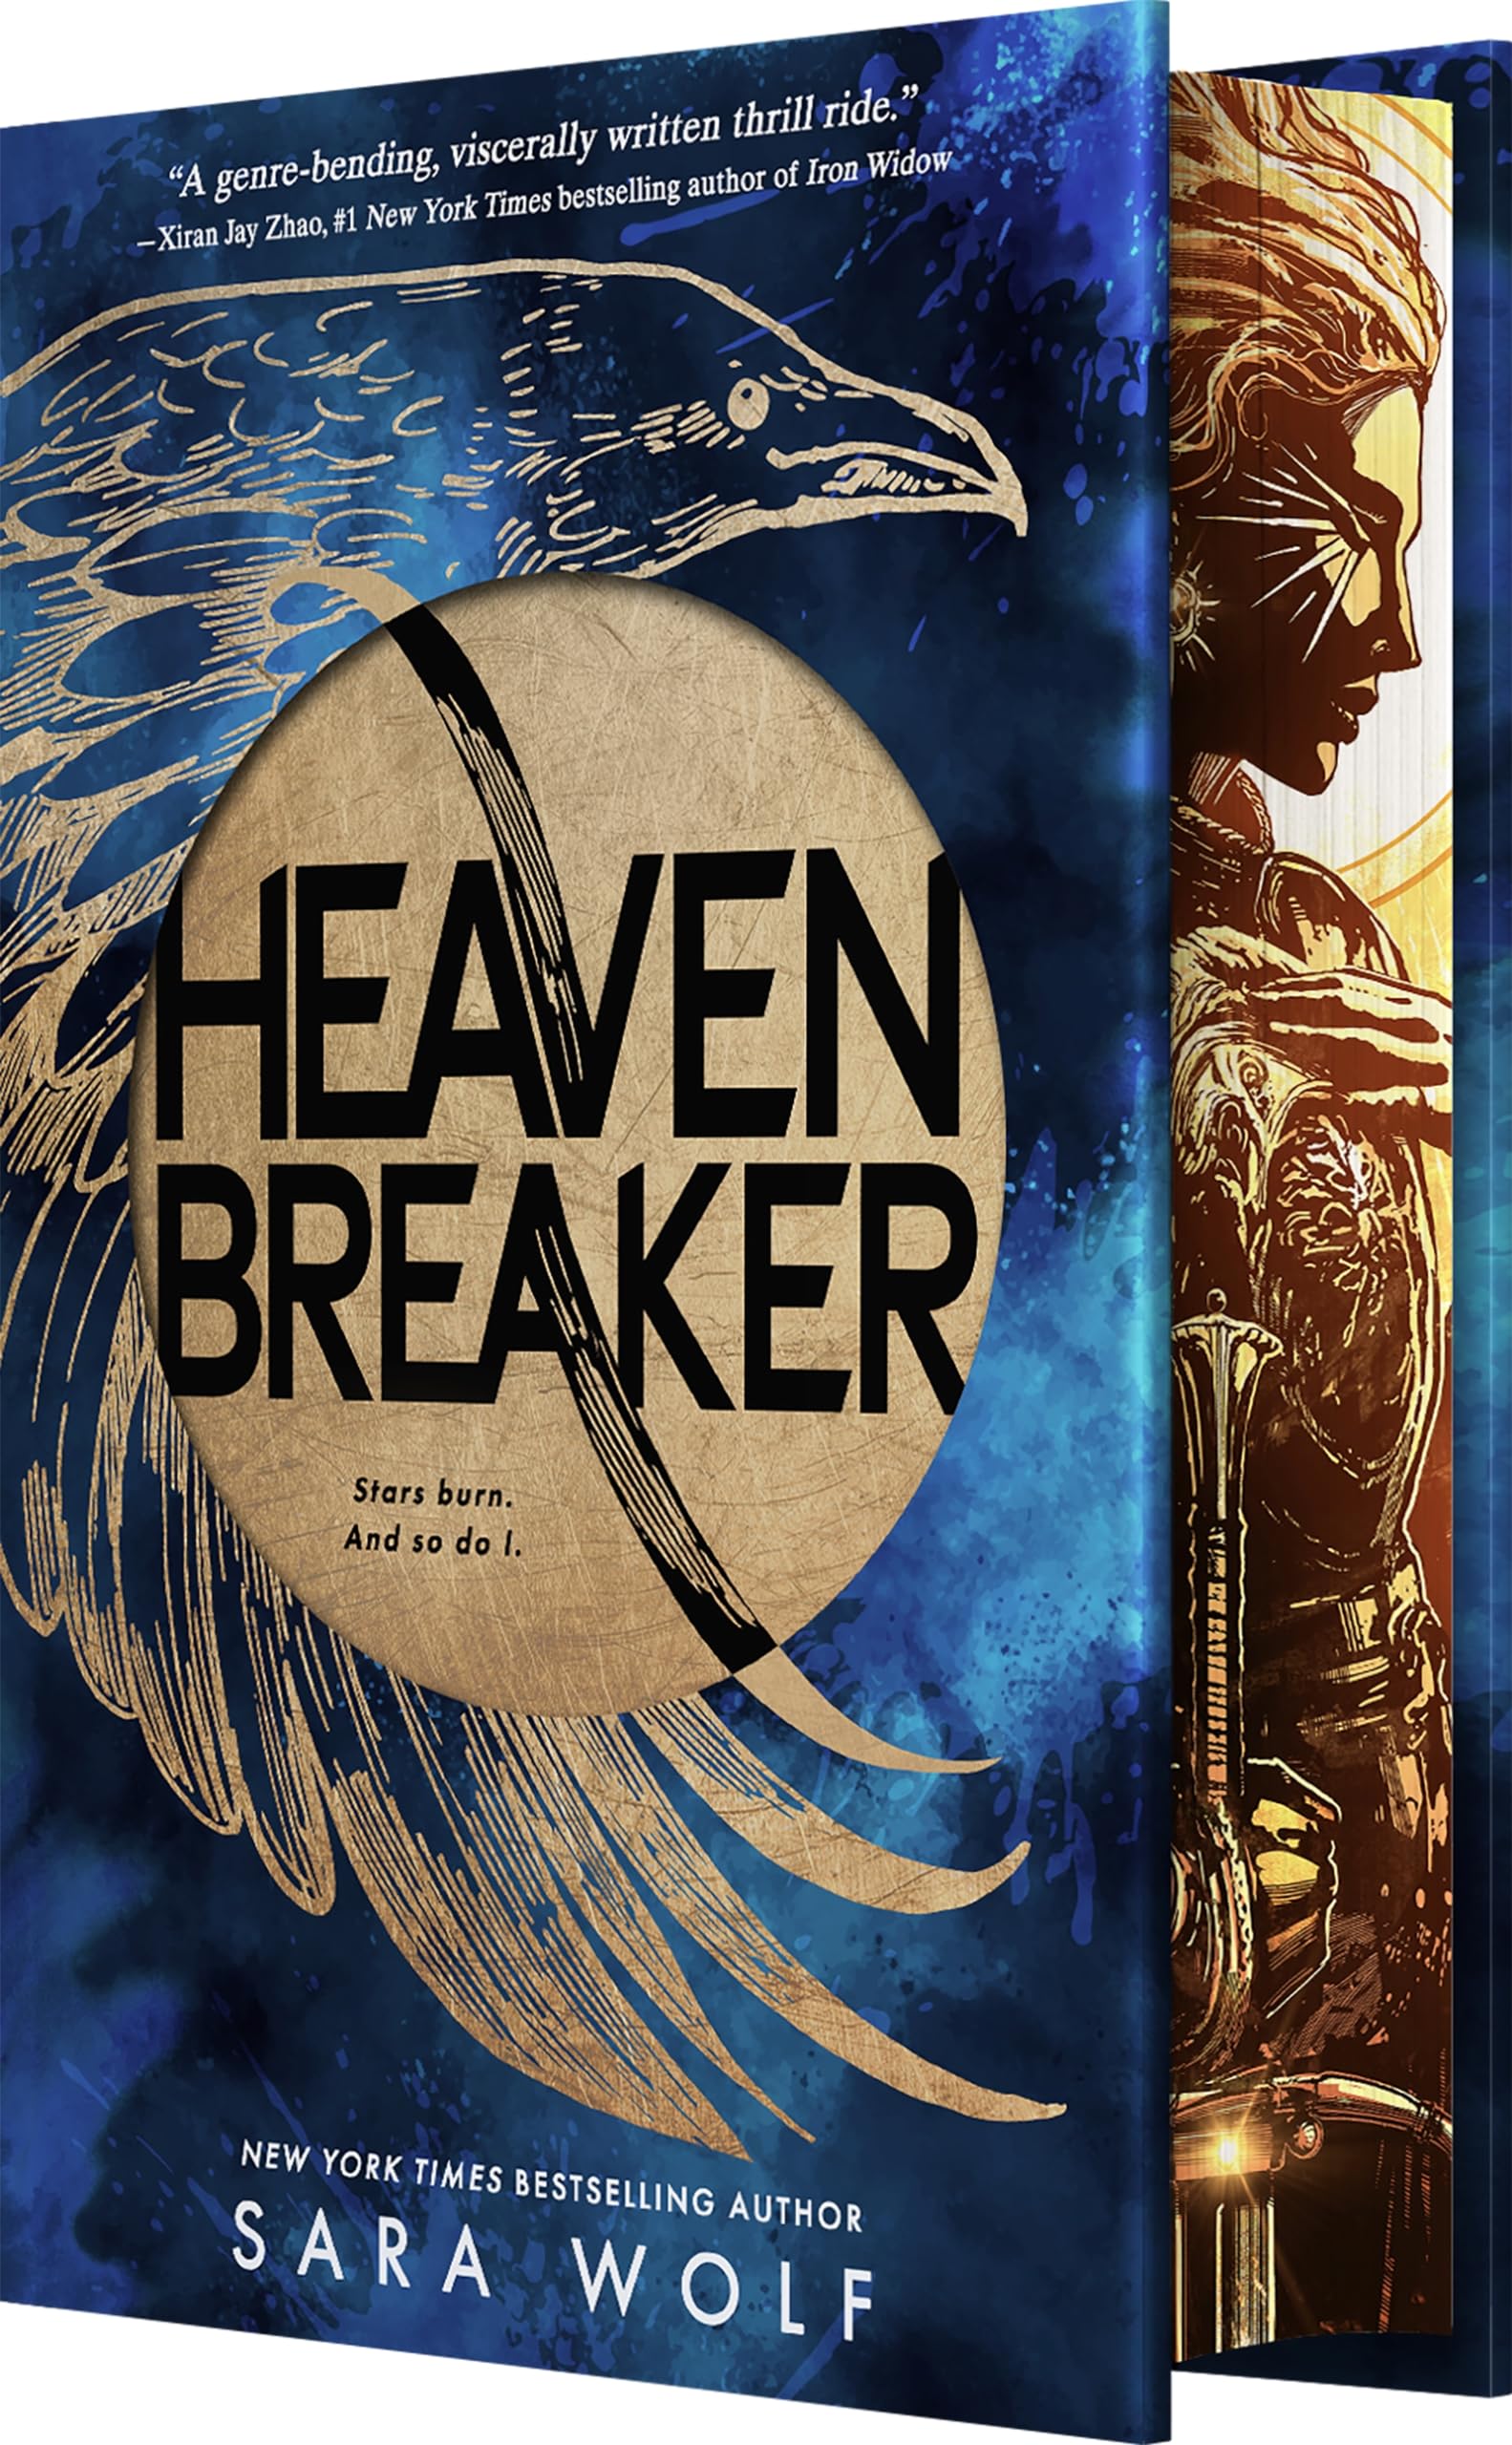 Heavenbreaker (Deluxe Limited Edition) by Wolf, Sara